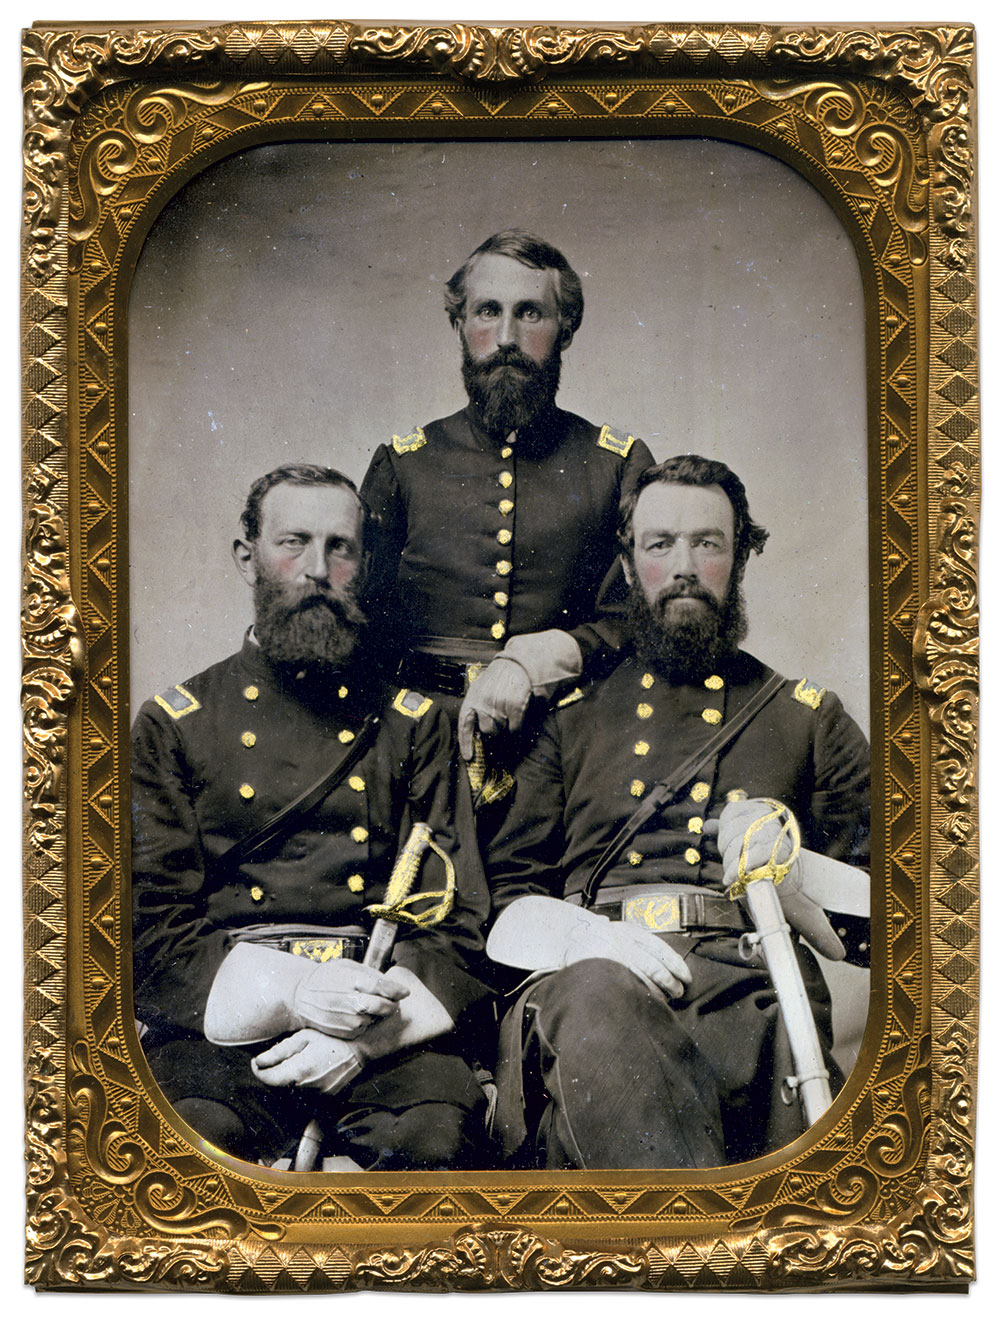 Matthies, left, pictured as colonel of the 5th, sits with 1st Lt. and Adjutant Robert Franklin Patterson (1836-1907), center, who went on to become lieutenant colonel of the 29th Iowa Infantry, and Maj. William Stephenson Robertson (1831-1887). Quarter plate tintype by an unidentified photographer. Brian Boeve Collection.